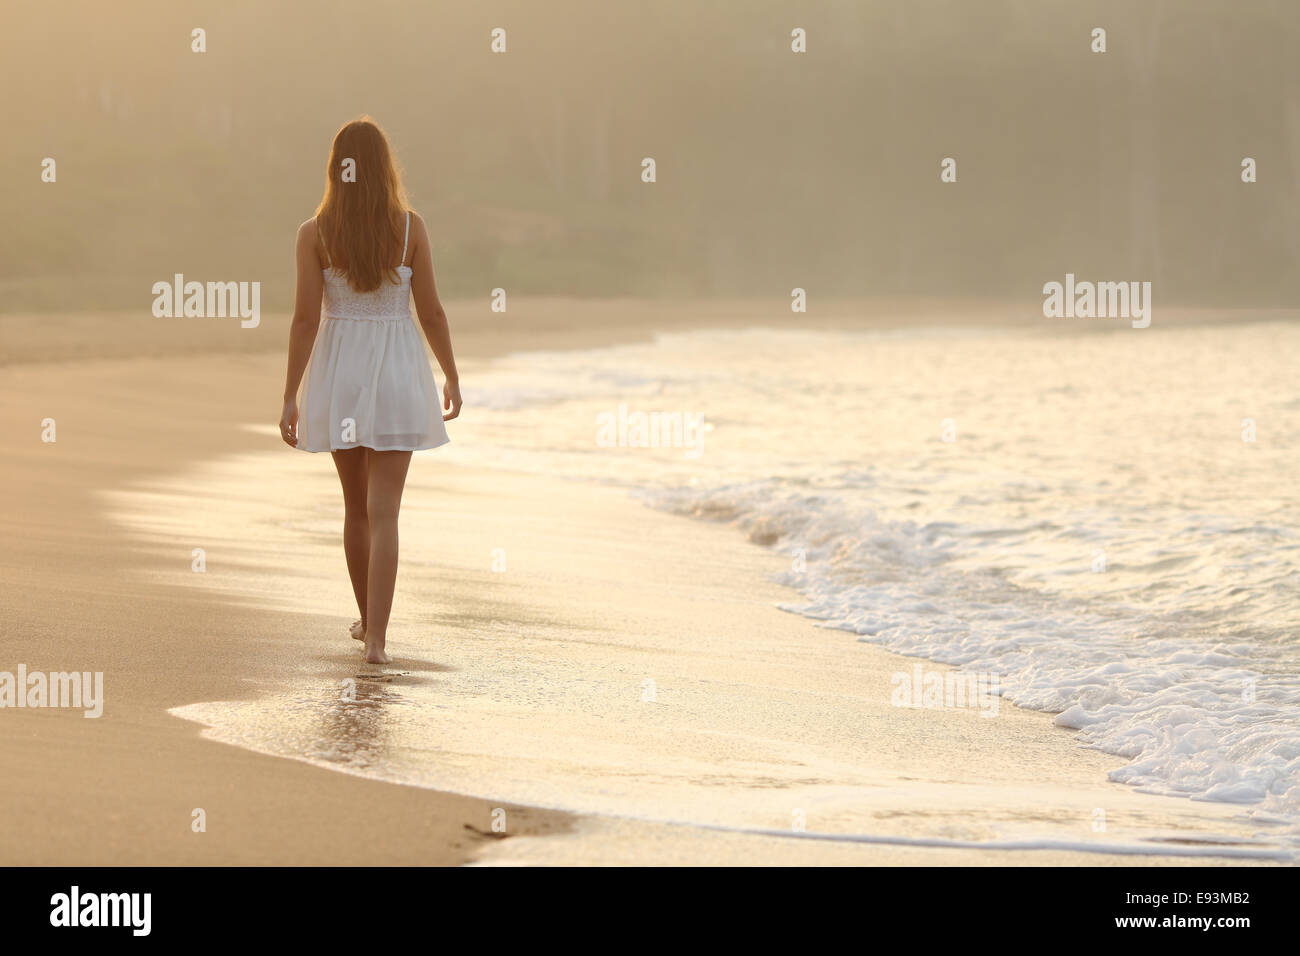 Back view of a woman walking on the sand of the beach at sunset Stock Photo